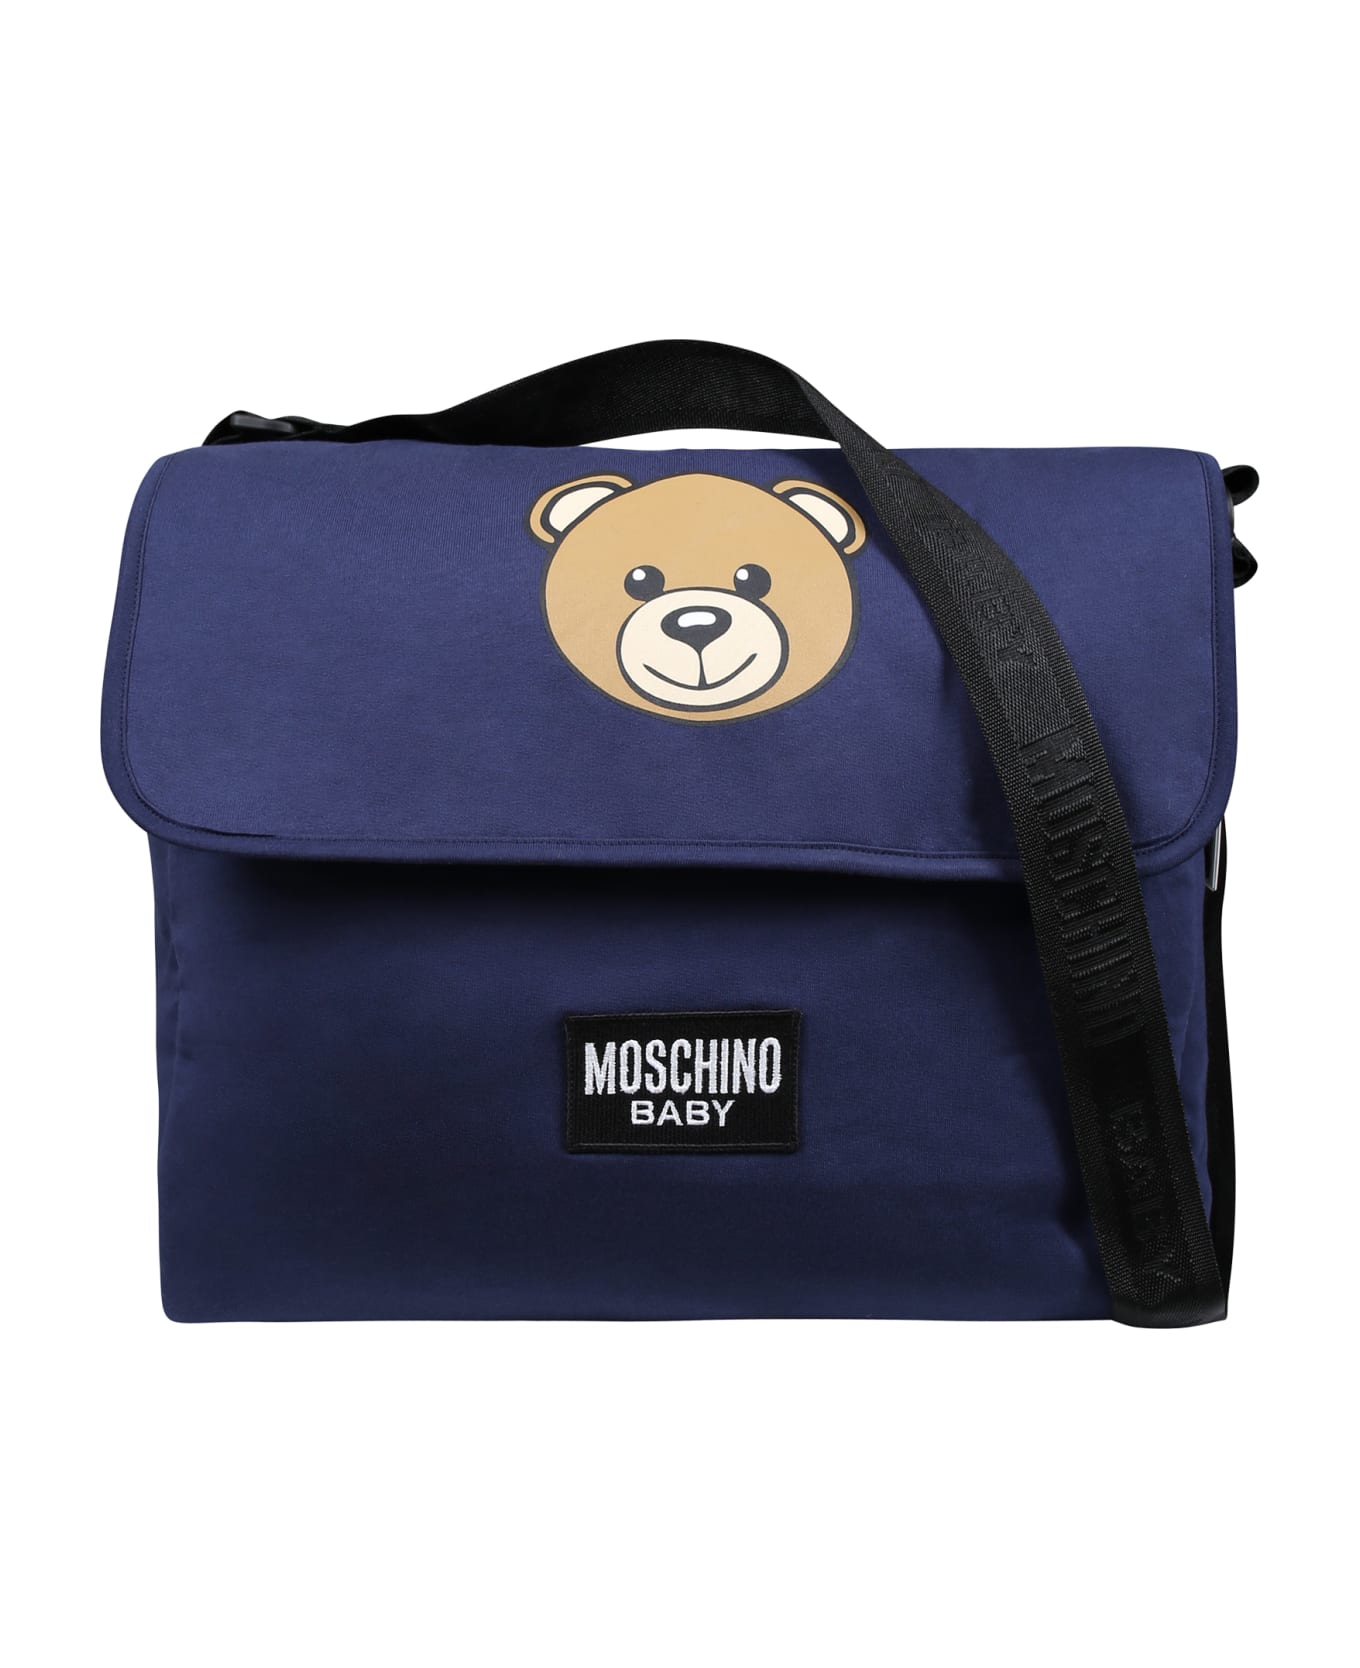 Moschino Blue Mother Bag For Babies With Teddy Bear And Logo - Blue